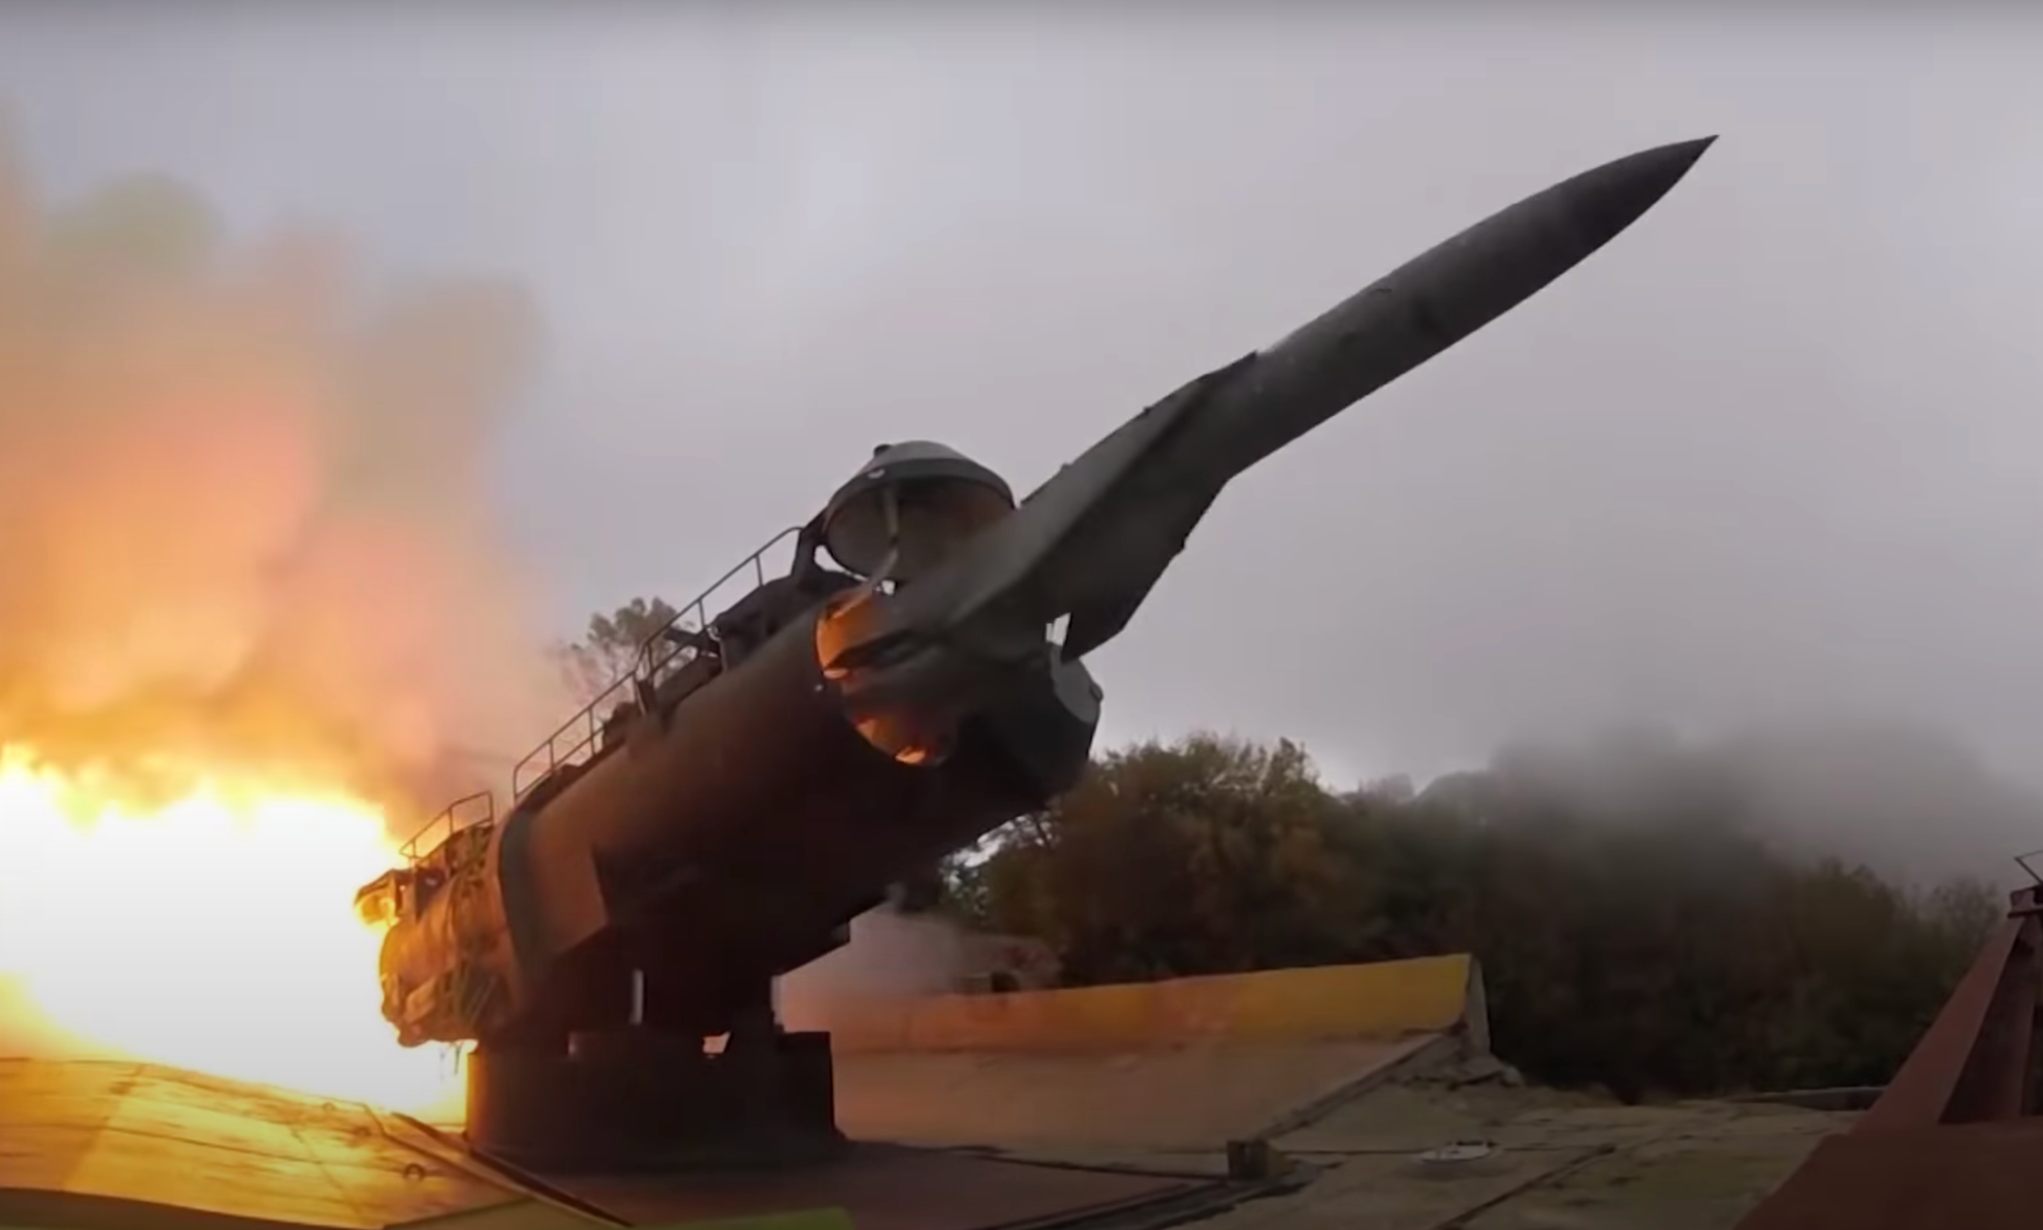 russia now using giant soviet-era ground-launched anti-ship missile to attack ukraine